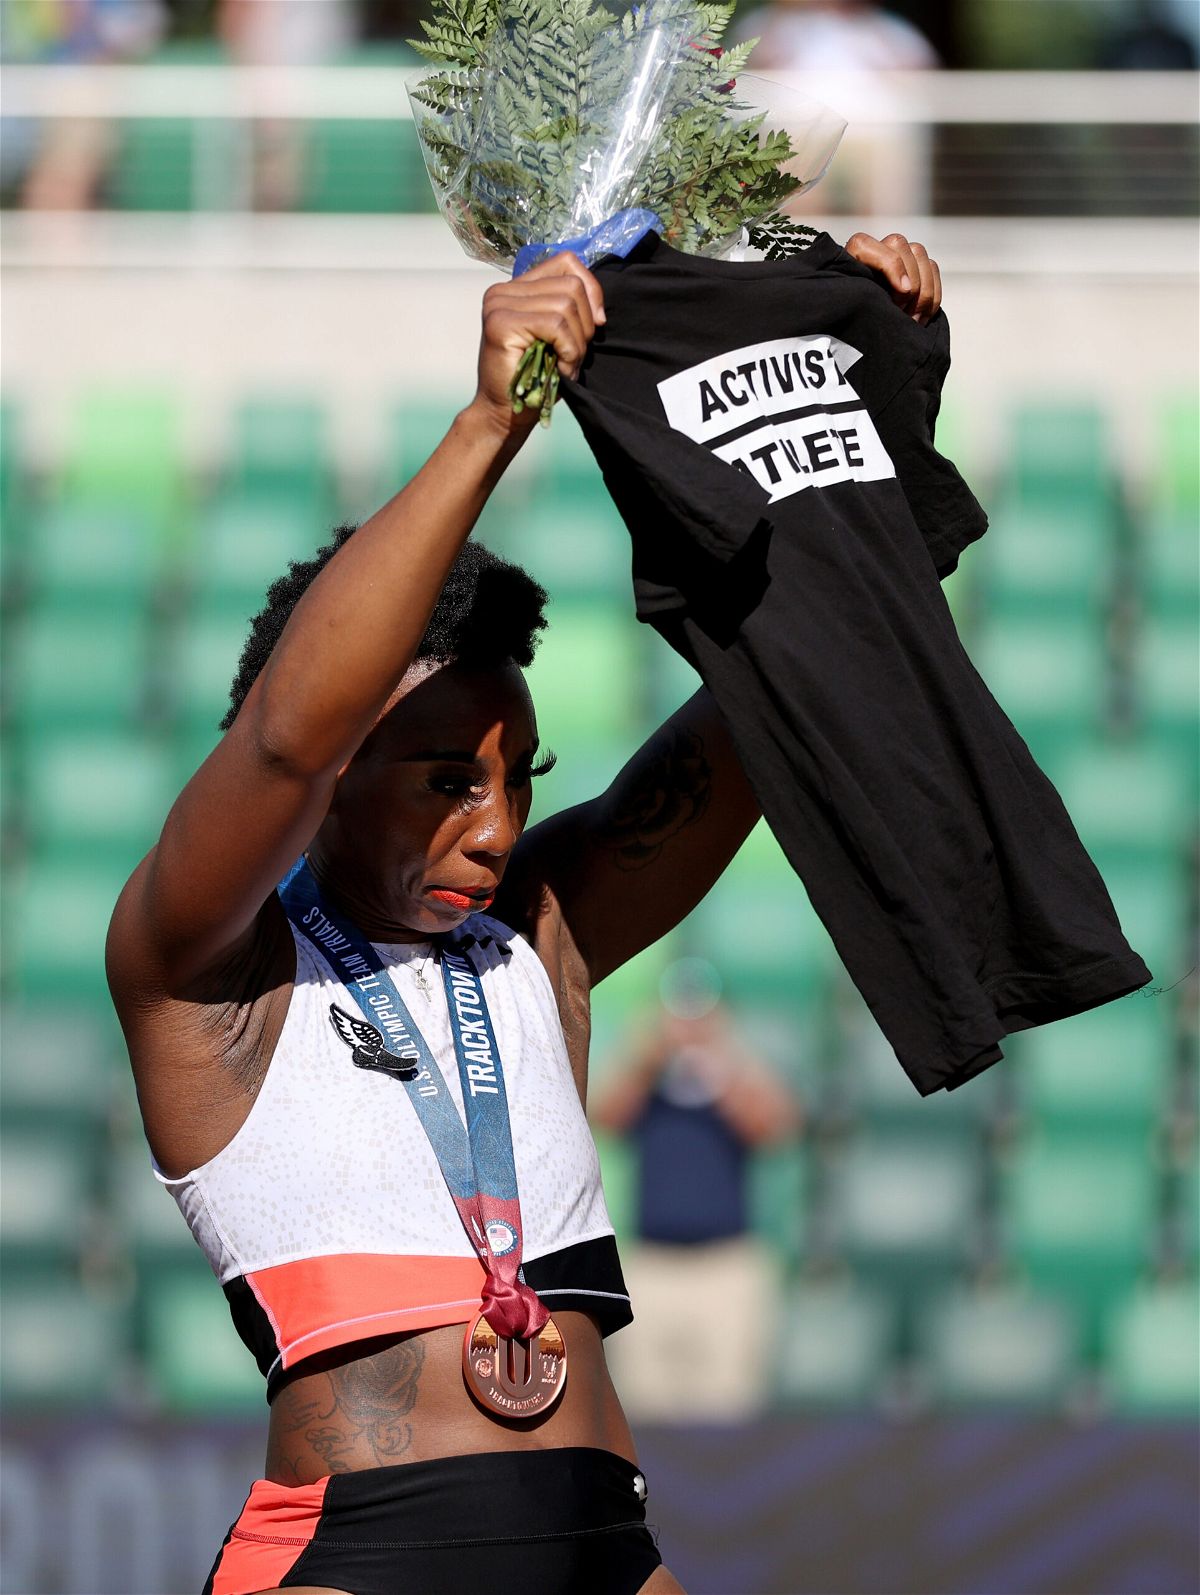 <i>Patrick Smith/Getty Images North America/Getty Images</i><br/>Gwen Berry holds up a shirt reading 